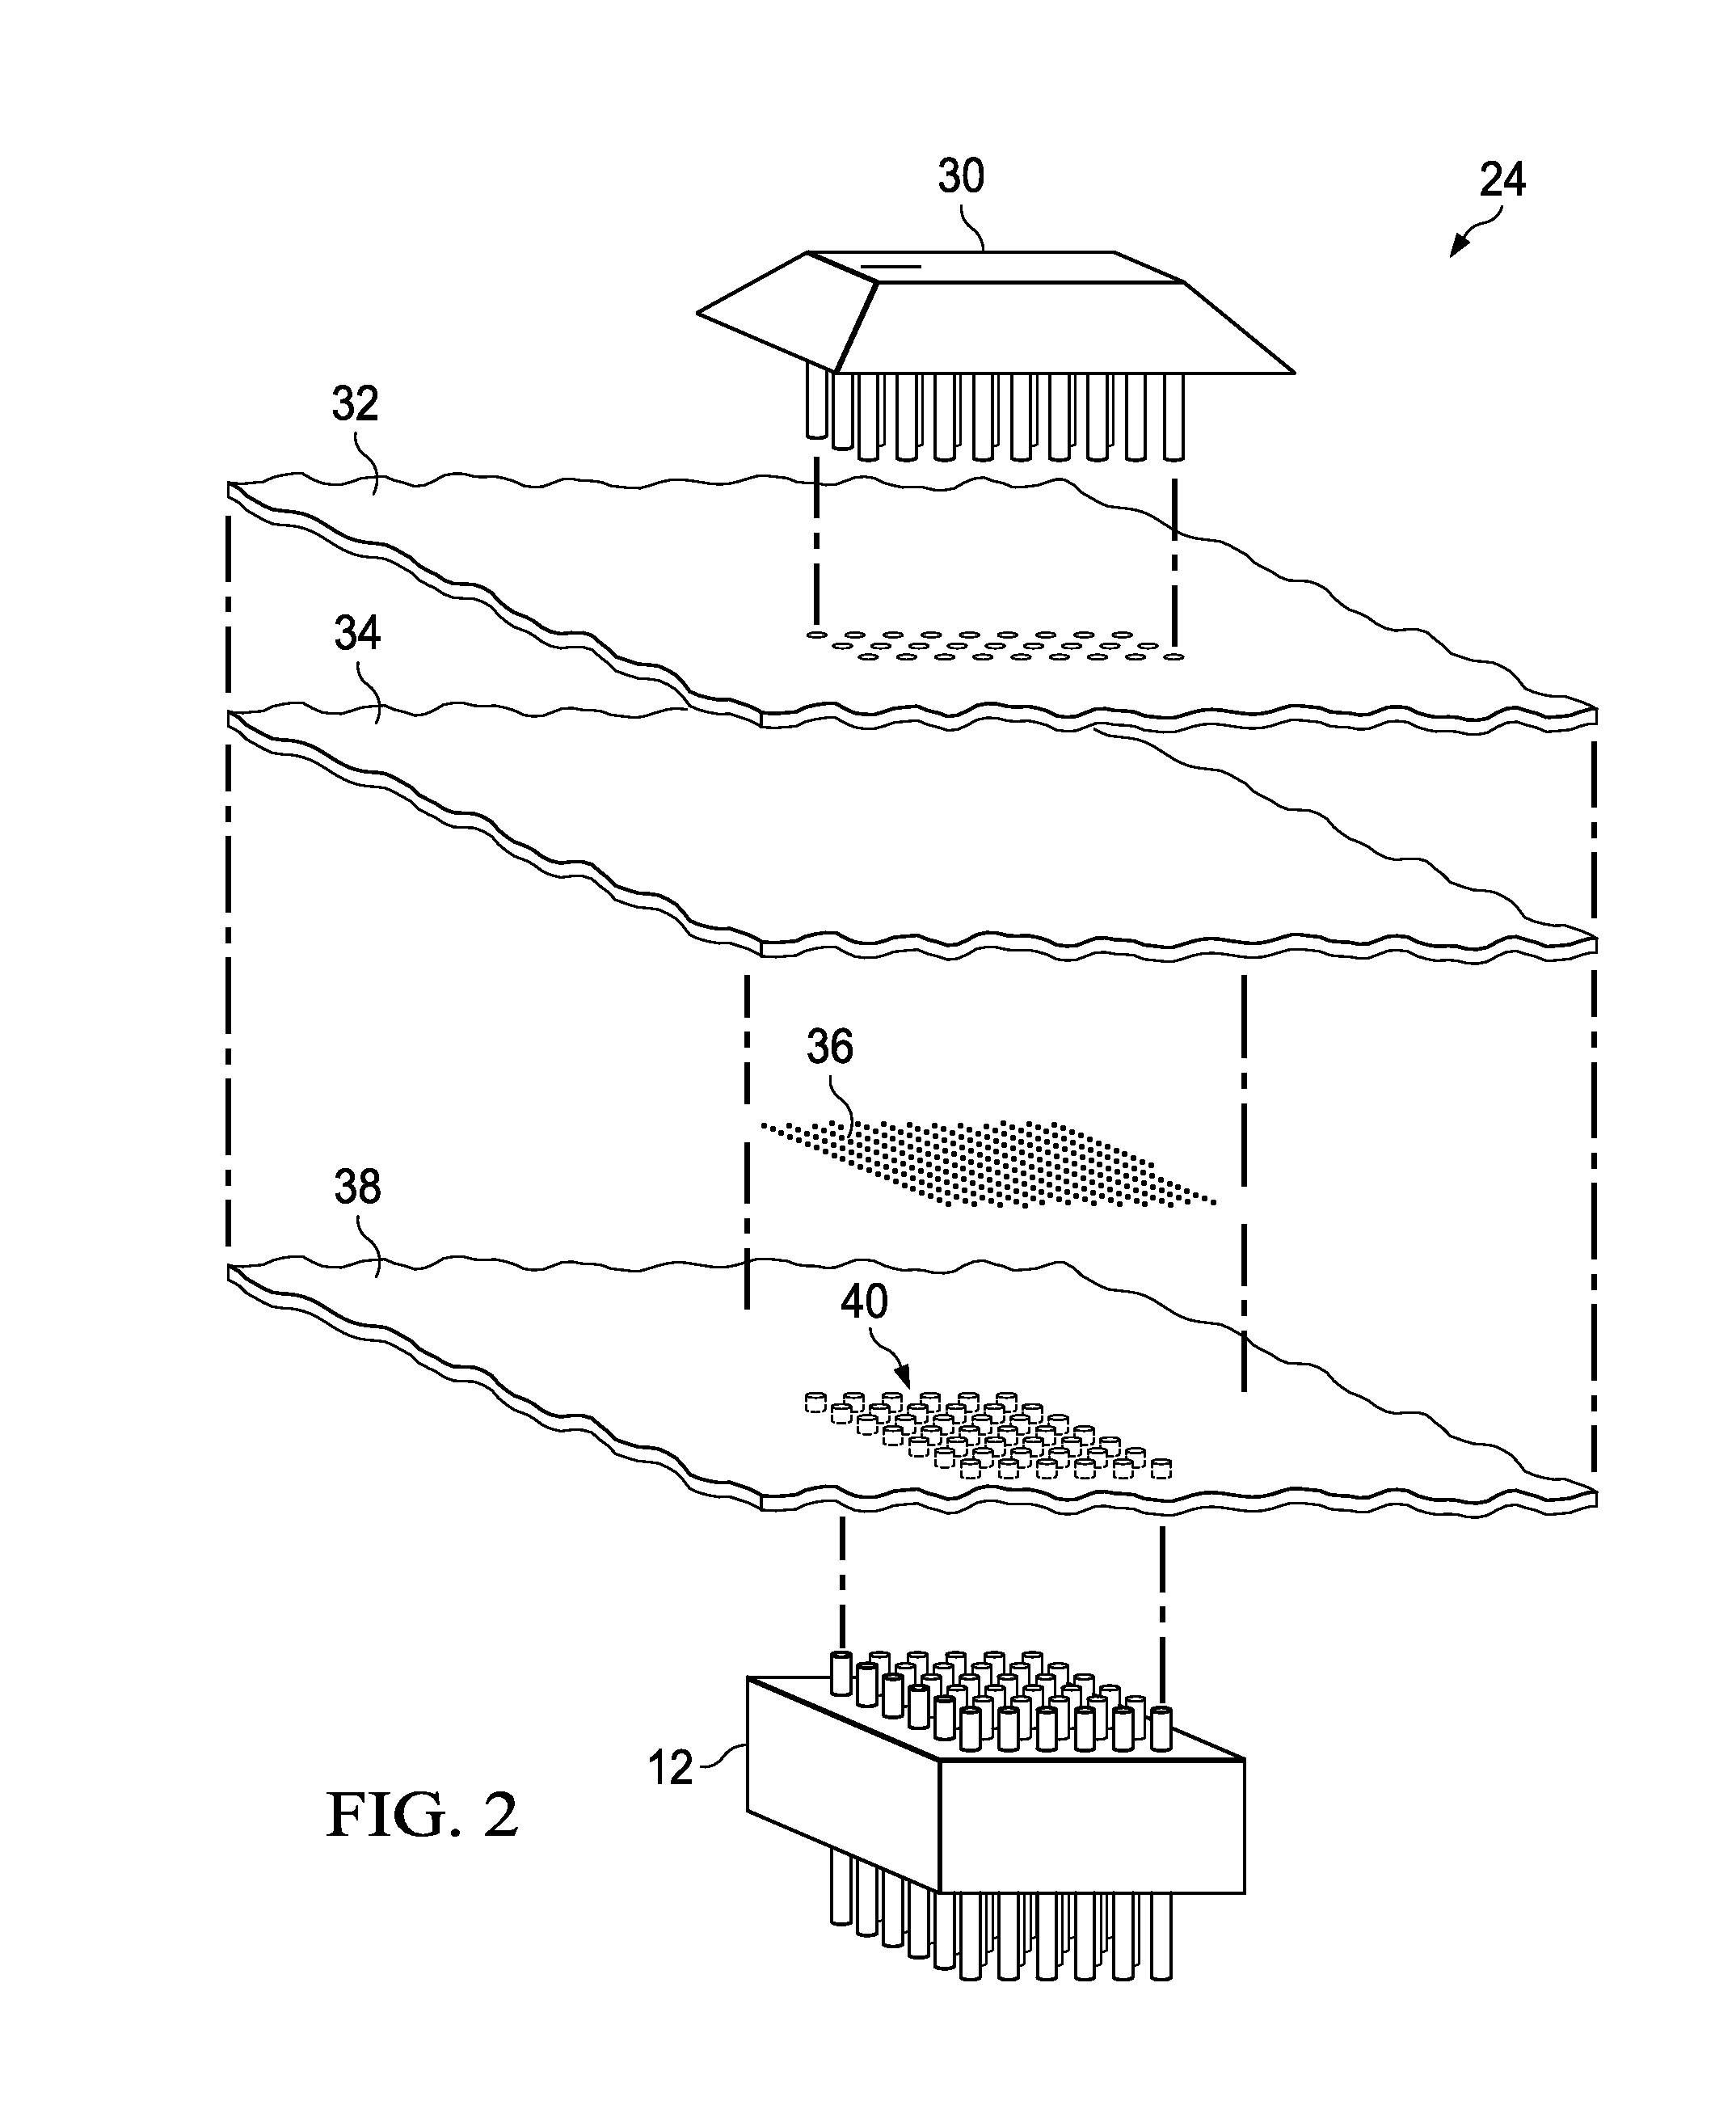 Blind Via Printed Circuit Board Fabrication Supporting Press Fit Connectors